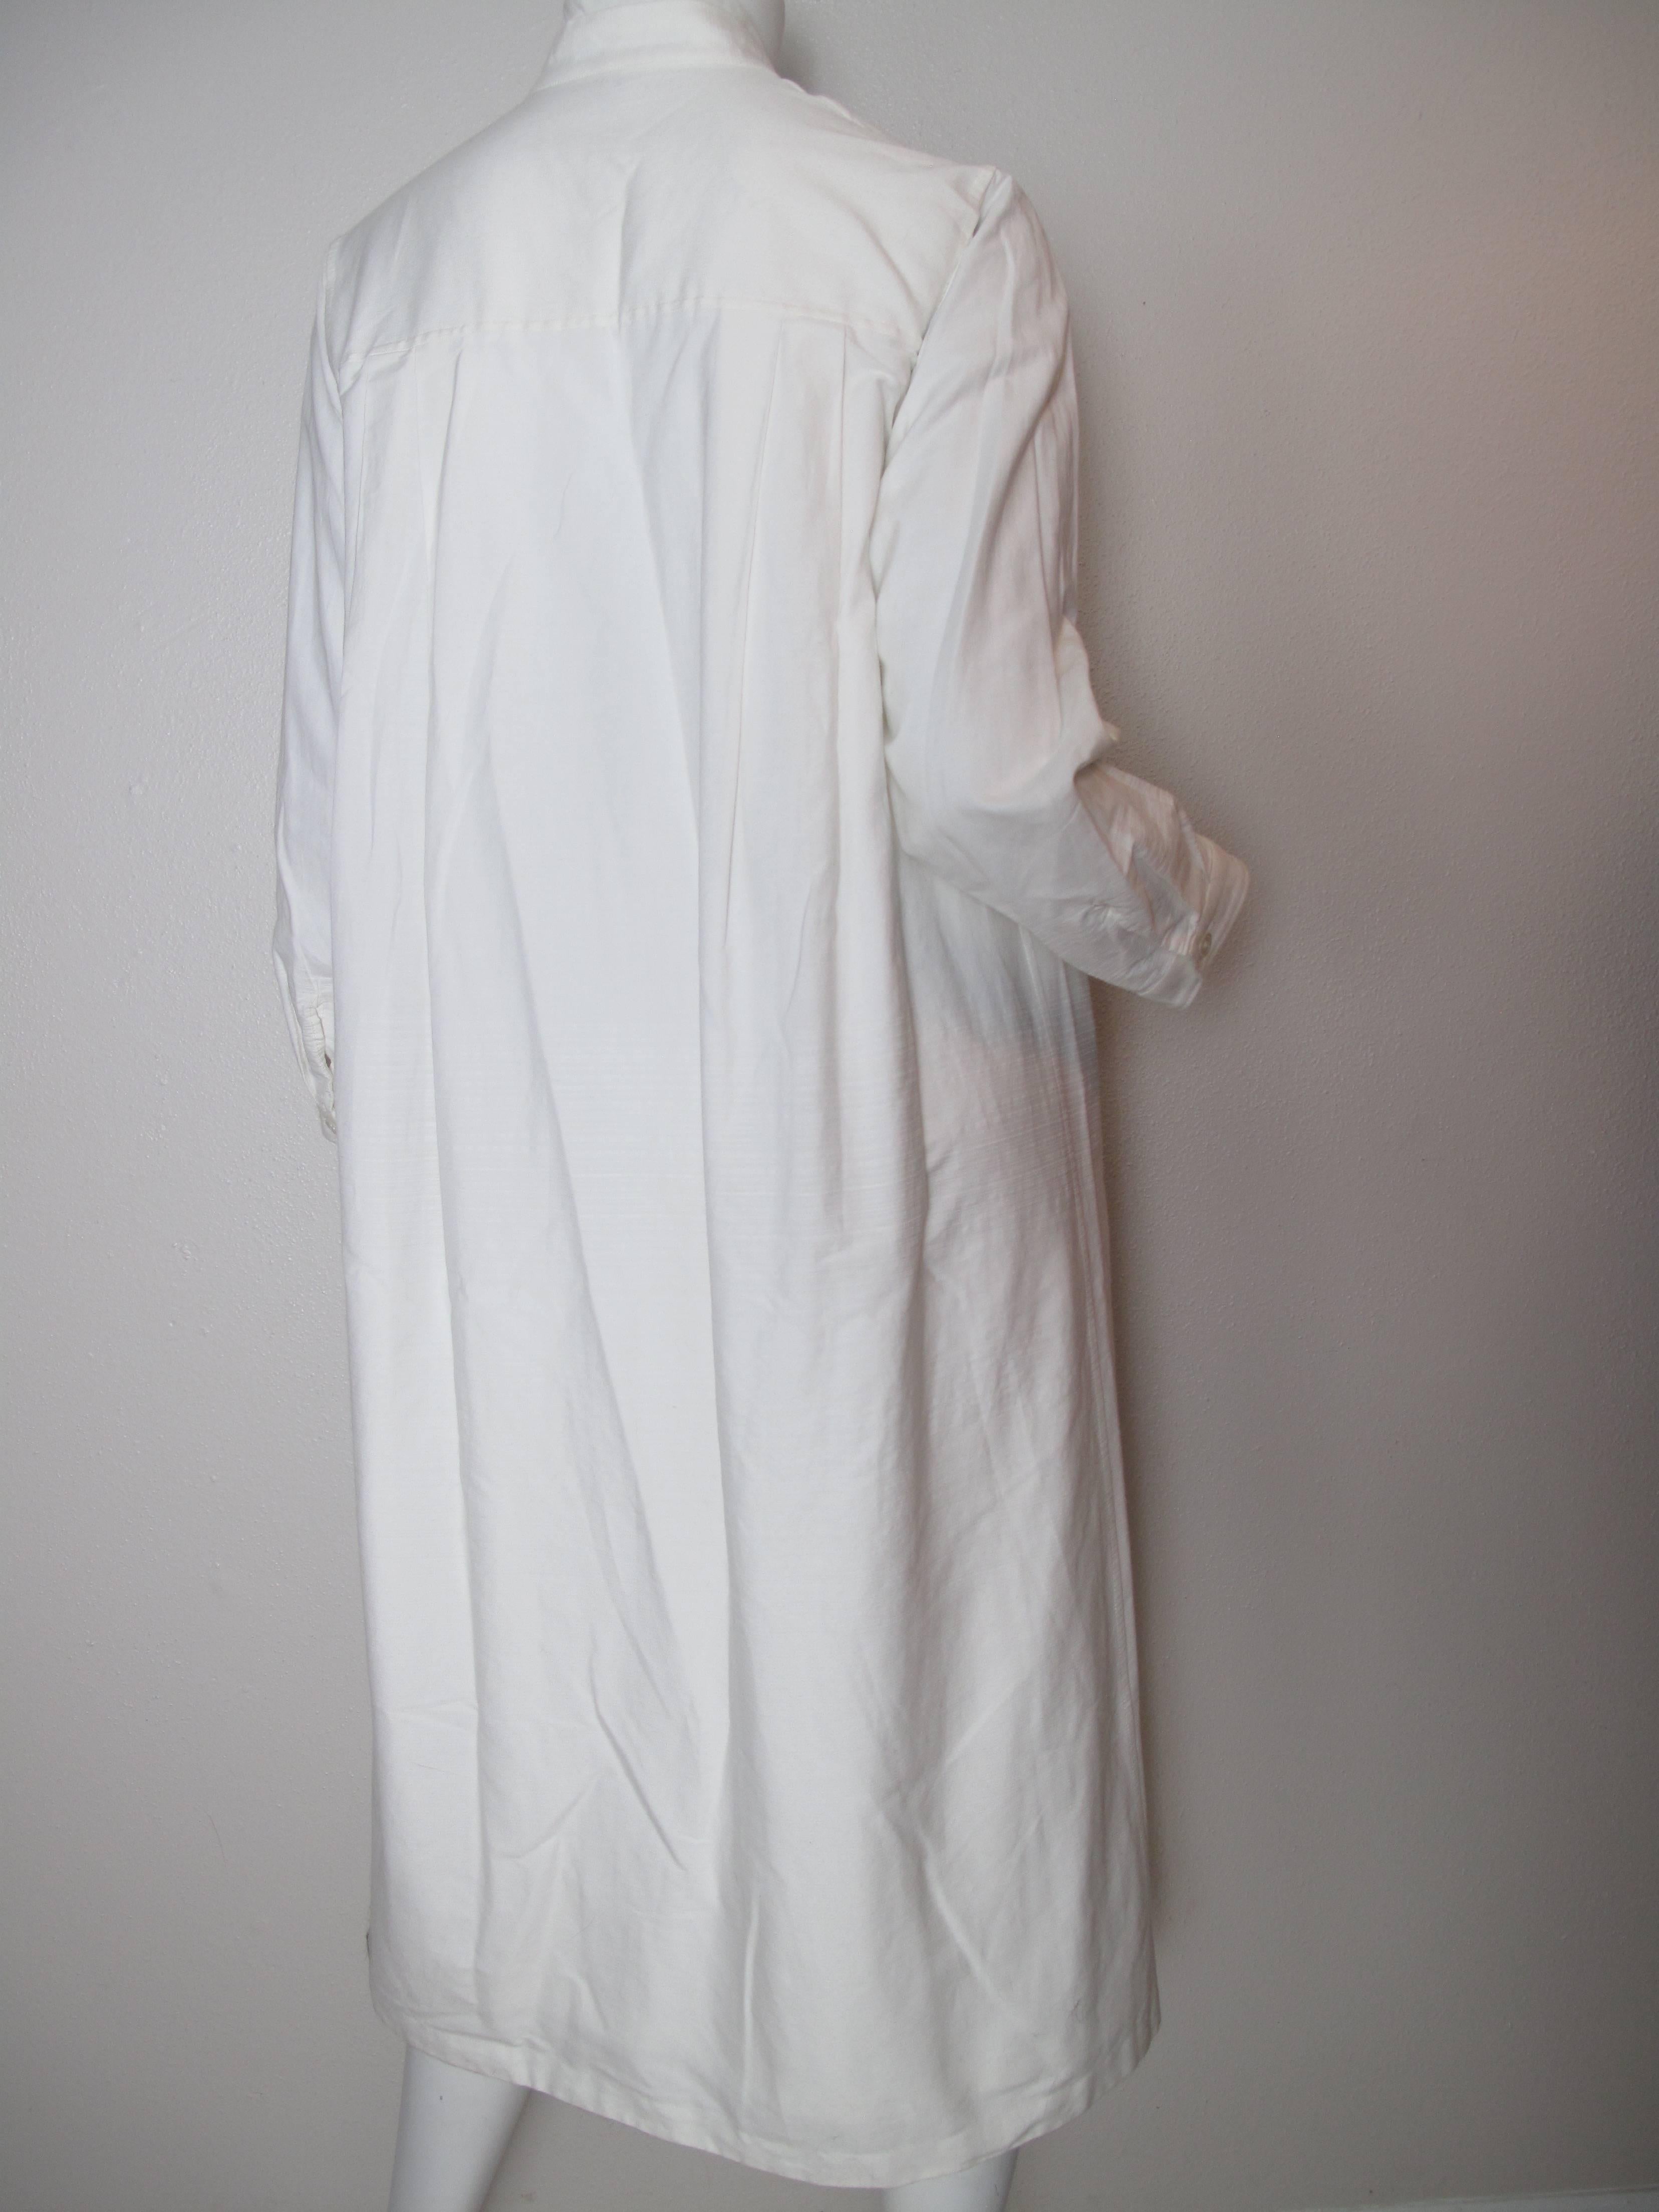 Issey Miyake white cotton/ poly long button down shirt dress.  Condition: Good, some wear.  Size 3
We accept returns for refund, please see our terms.  We offer free ground shipping within the US. Let us know if you have any questions. 
